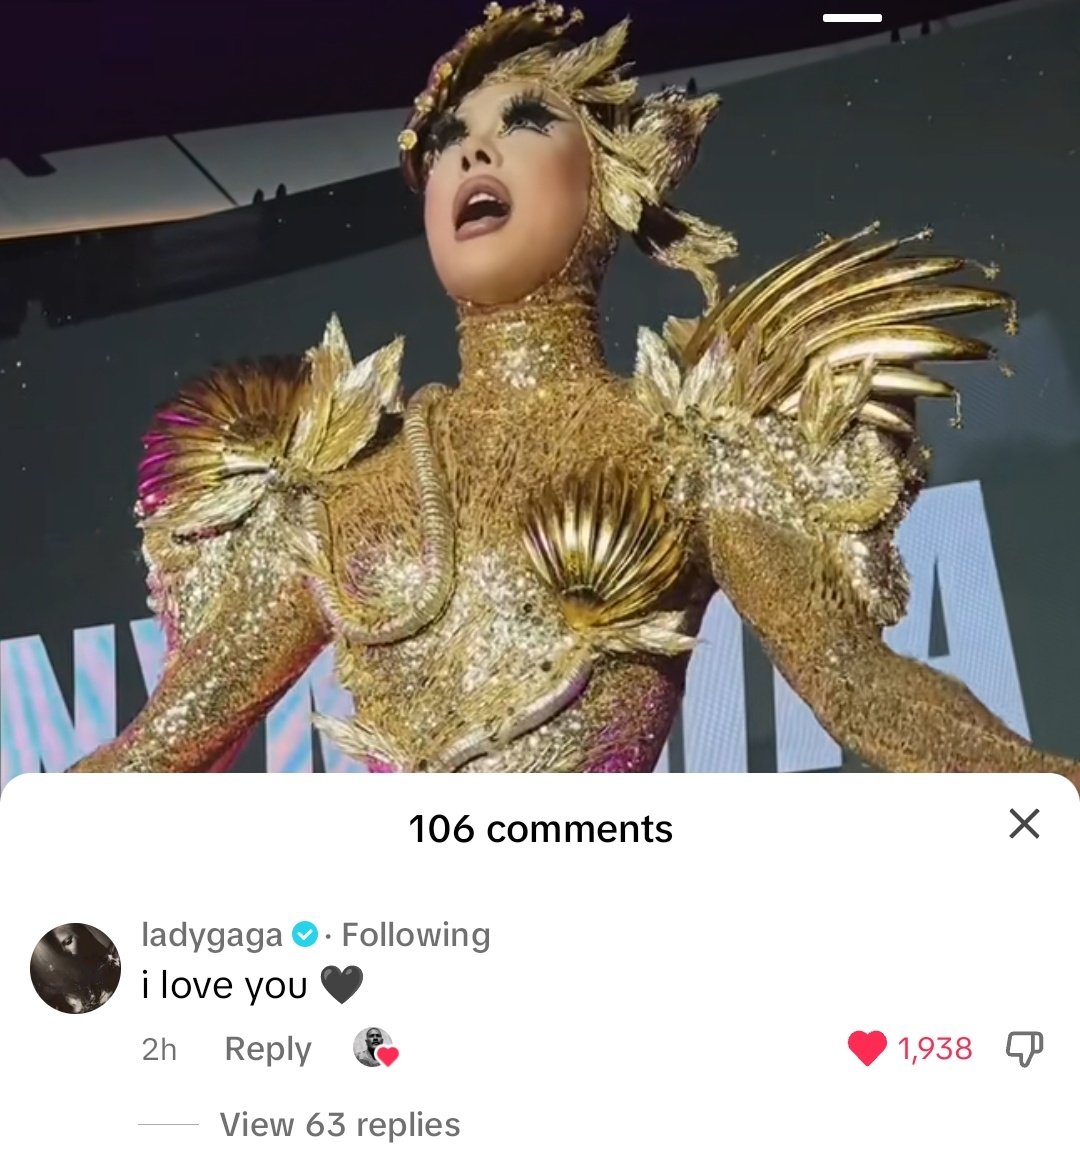 Lady Gaga expressed her love for #DragRace’s latest crowned queen, Nymphia Wind, by commenting on a TikTok video of her performing “Marry The Night.” LINK TO VIDEO: vt.tiktok.com/ZSFWygukL/